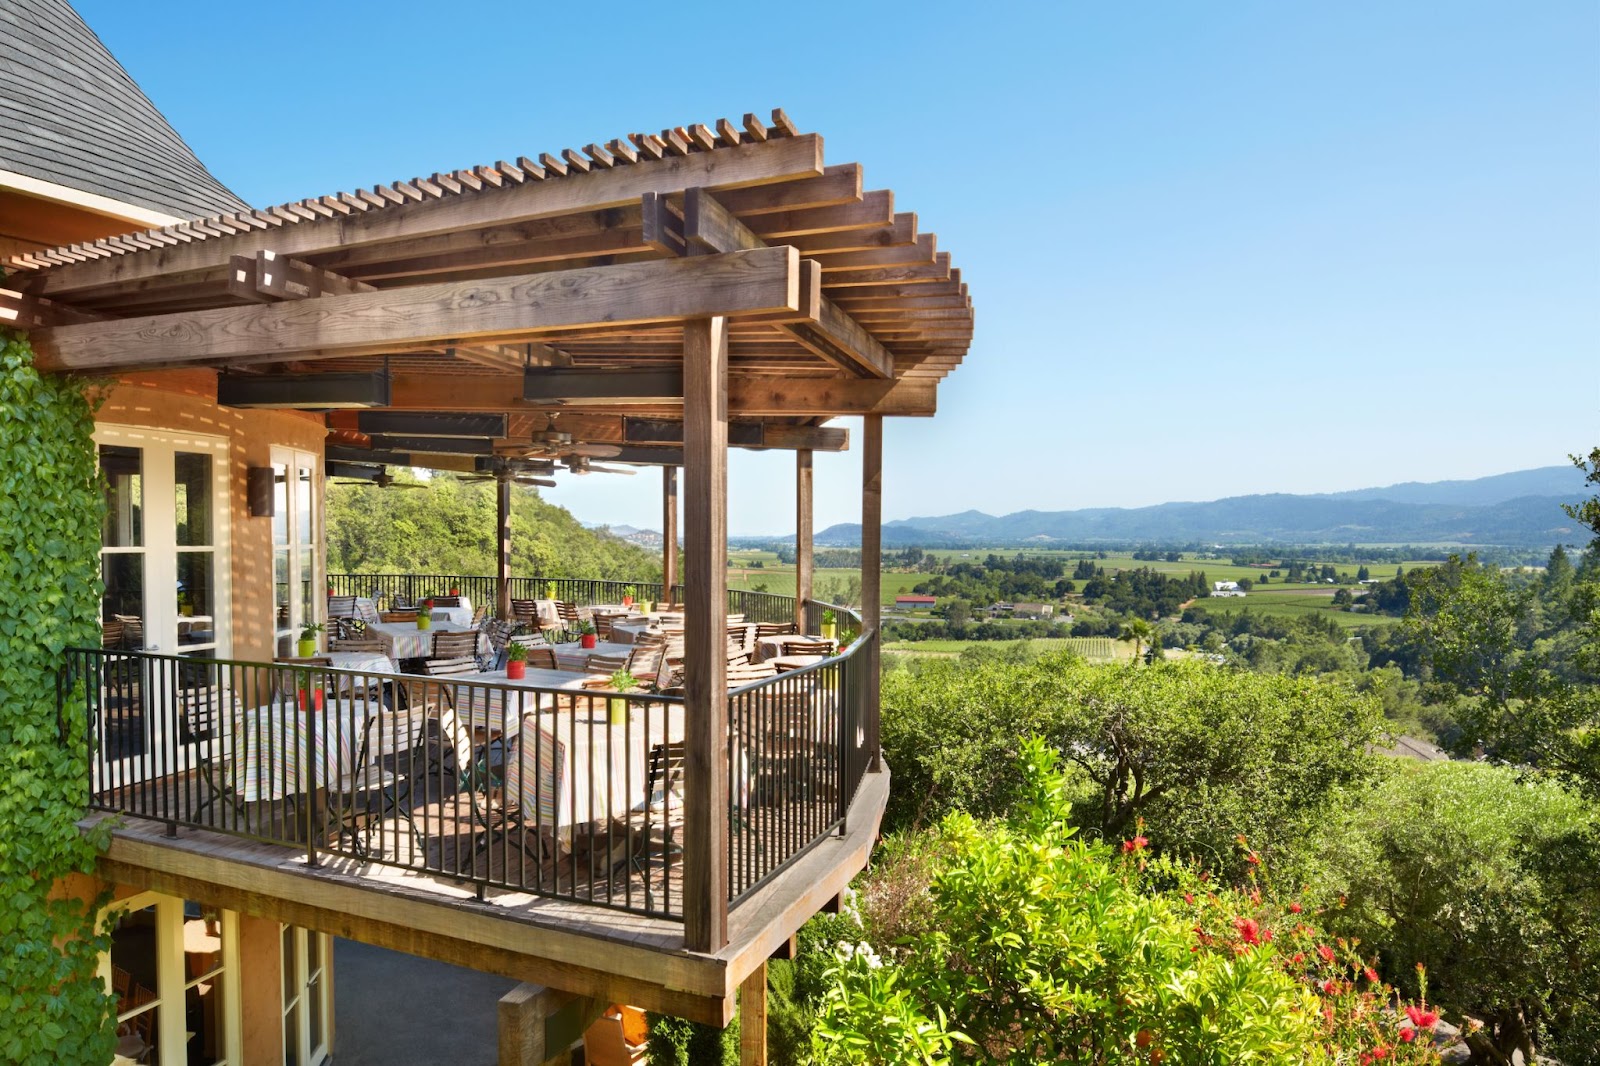 Get relaxed and enjoy the luxurious stay at Auberge du Soleil in Napa Valley